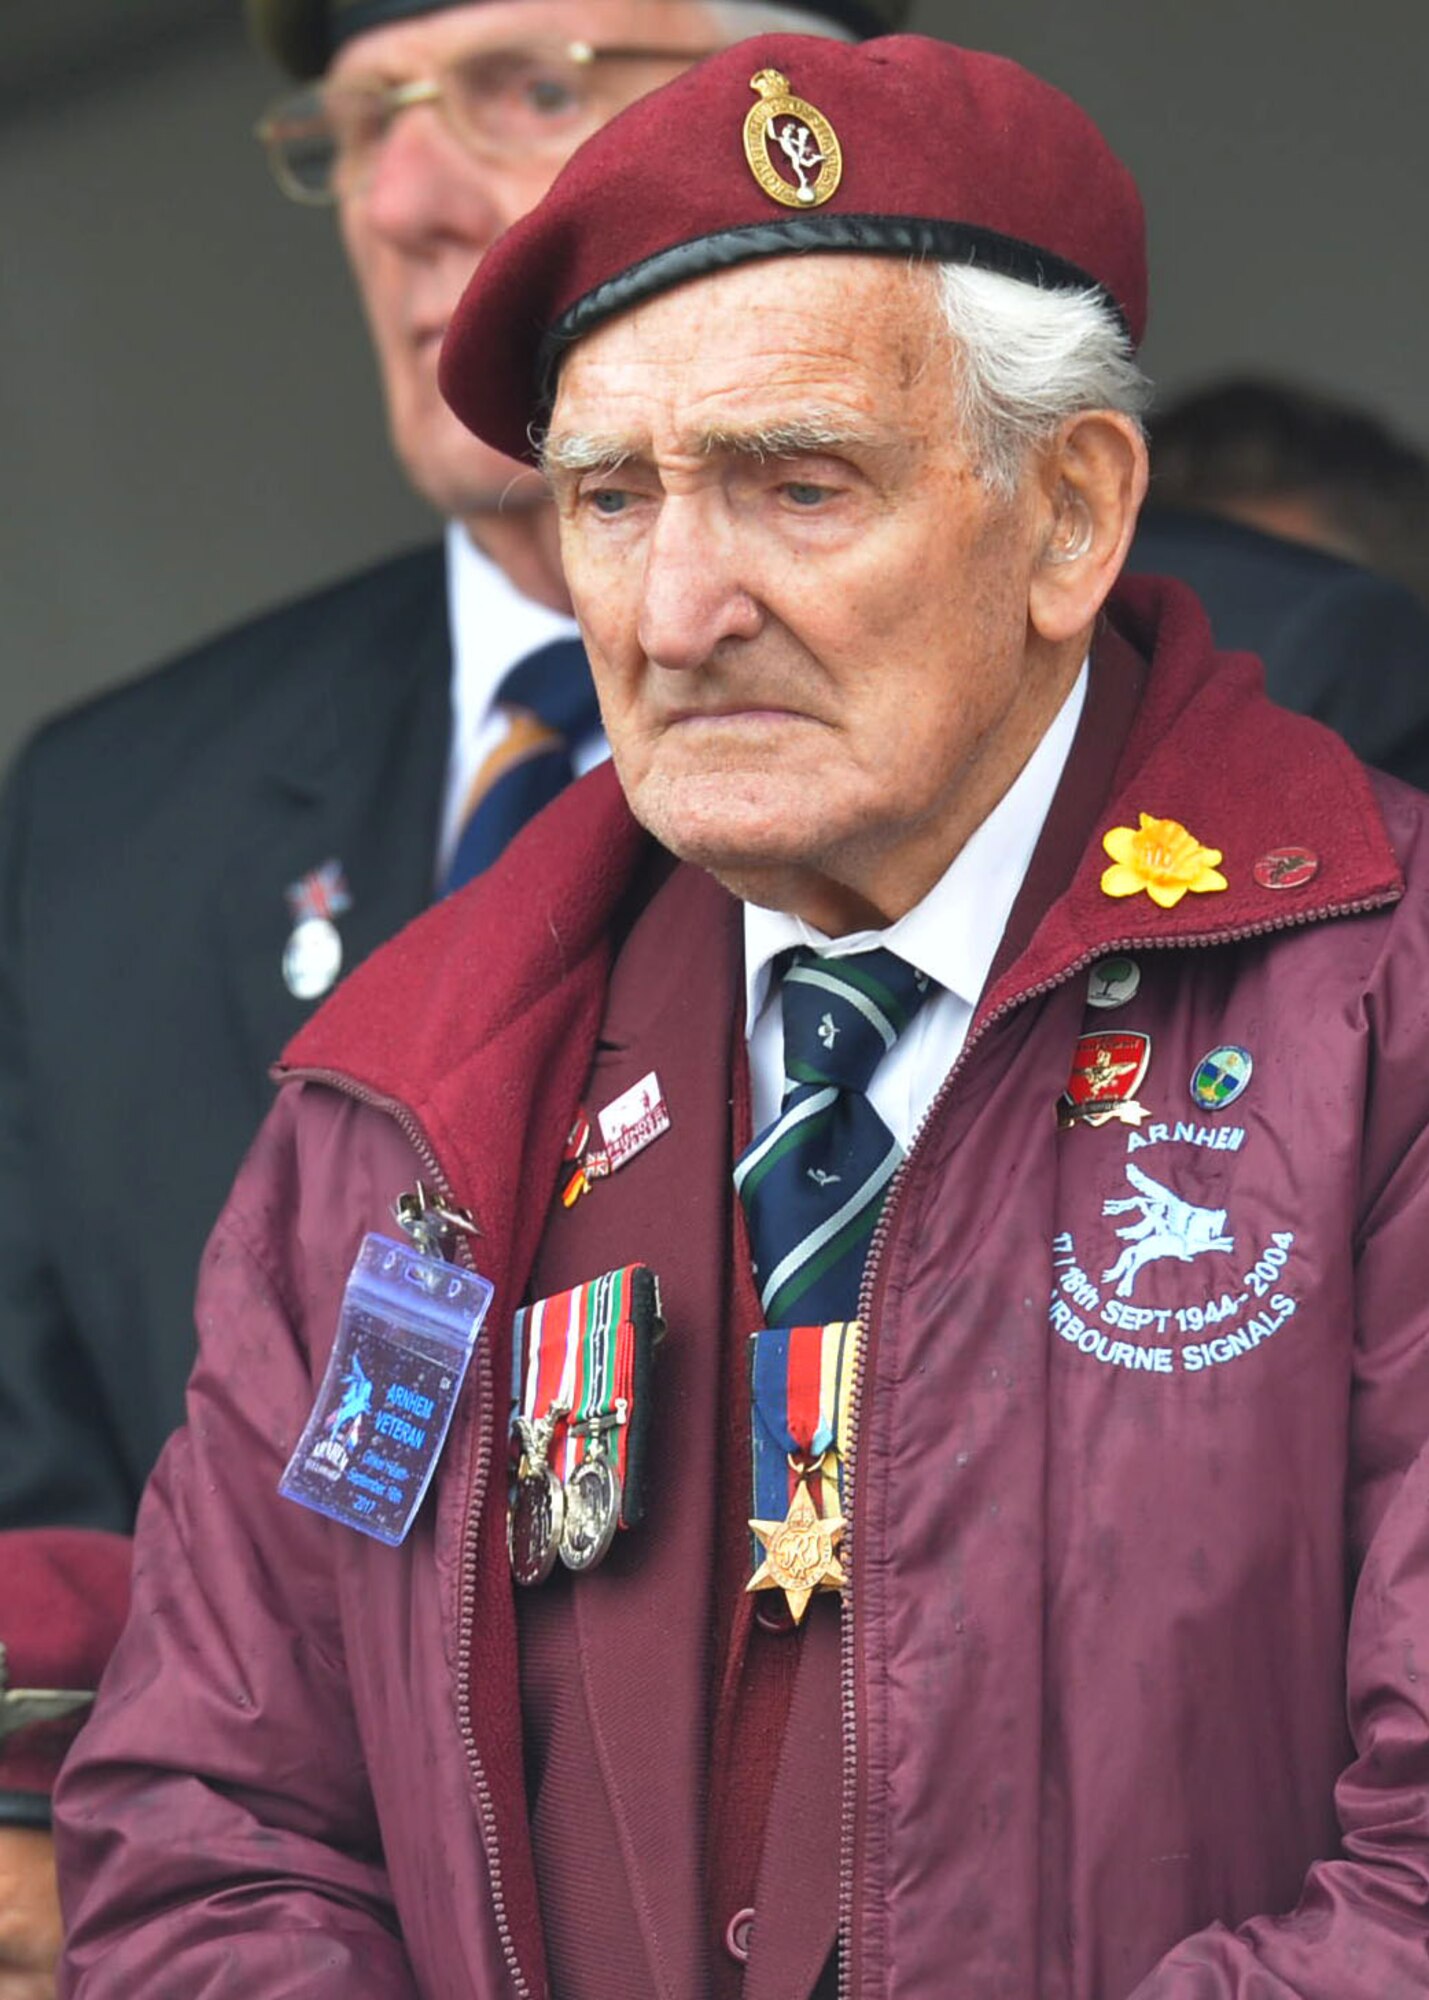 A World War II and Operation Market Garden veteran stands for a moment of silence to remember those who sacrificed their lives 73 years ago on Sept. 16, 2017, at Ede, Netherlands. This event marks the 73rd anniversary of Operation Marked Garden, the largest airborne operation in history. (U.S. Air Force photo by Airman 1st Class Codie Collins)